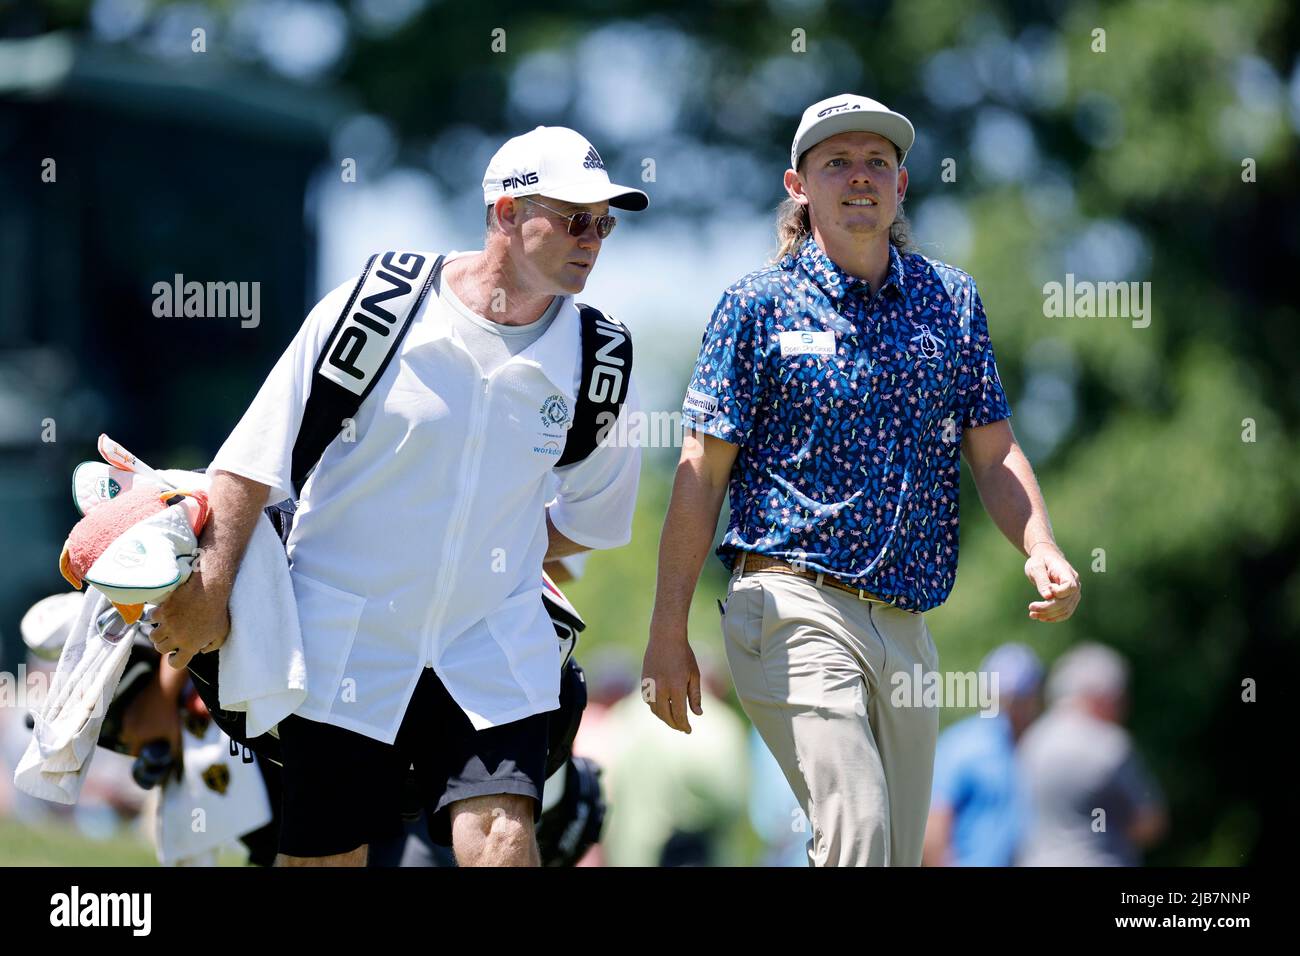 https://c8.alamy.com/comp/2JB7NNP/ohio-usa-03rd-june-2022-dublin-oh-june-03-cameron-smith-of-australia-walks-with-caddie-sam-pinfold-down-the-fairway-at-the-1st-hole-during-the-second-round-of-the-memorial-tournament-presented-by-workday-at-muirfield-village-golf-club-on-june-03-2022-in-dublin-ohio-credit-image-joe-robbinsicon-smi-via-zuma-press-credit-zuma-pressalamy-live-news-2JB7NNP.jpg